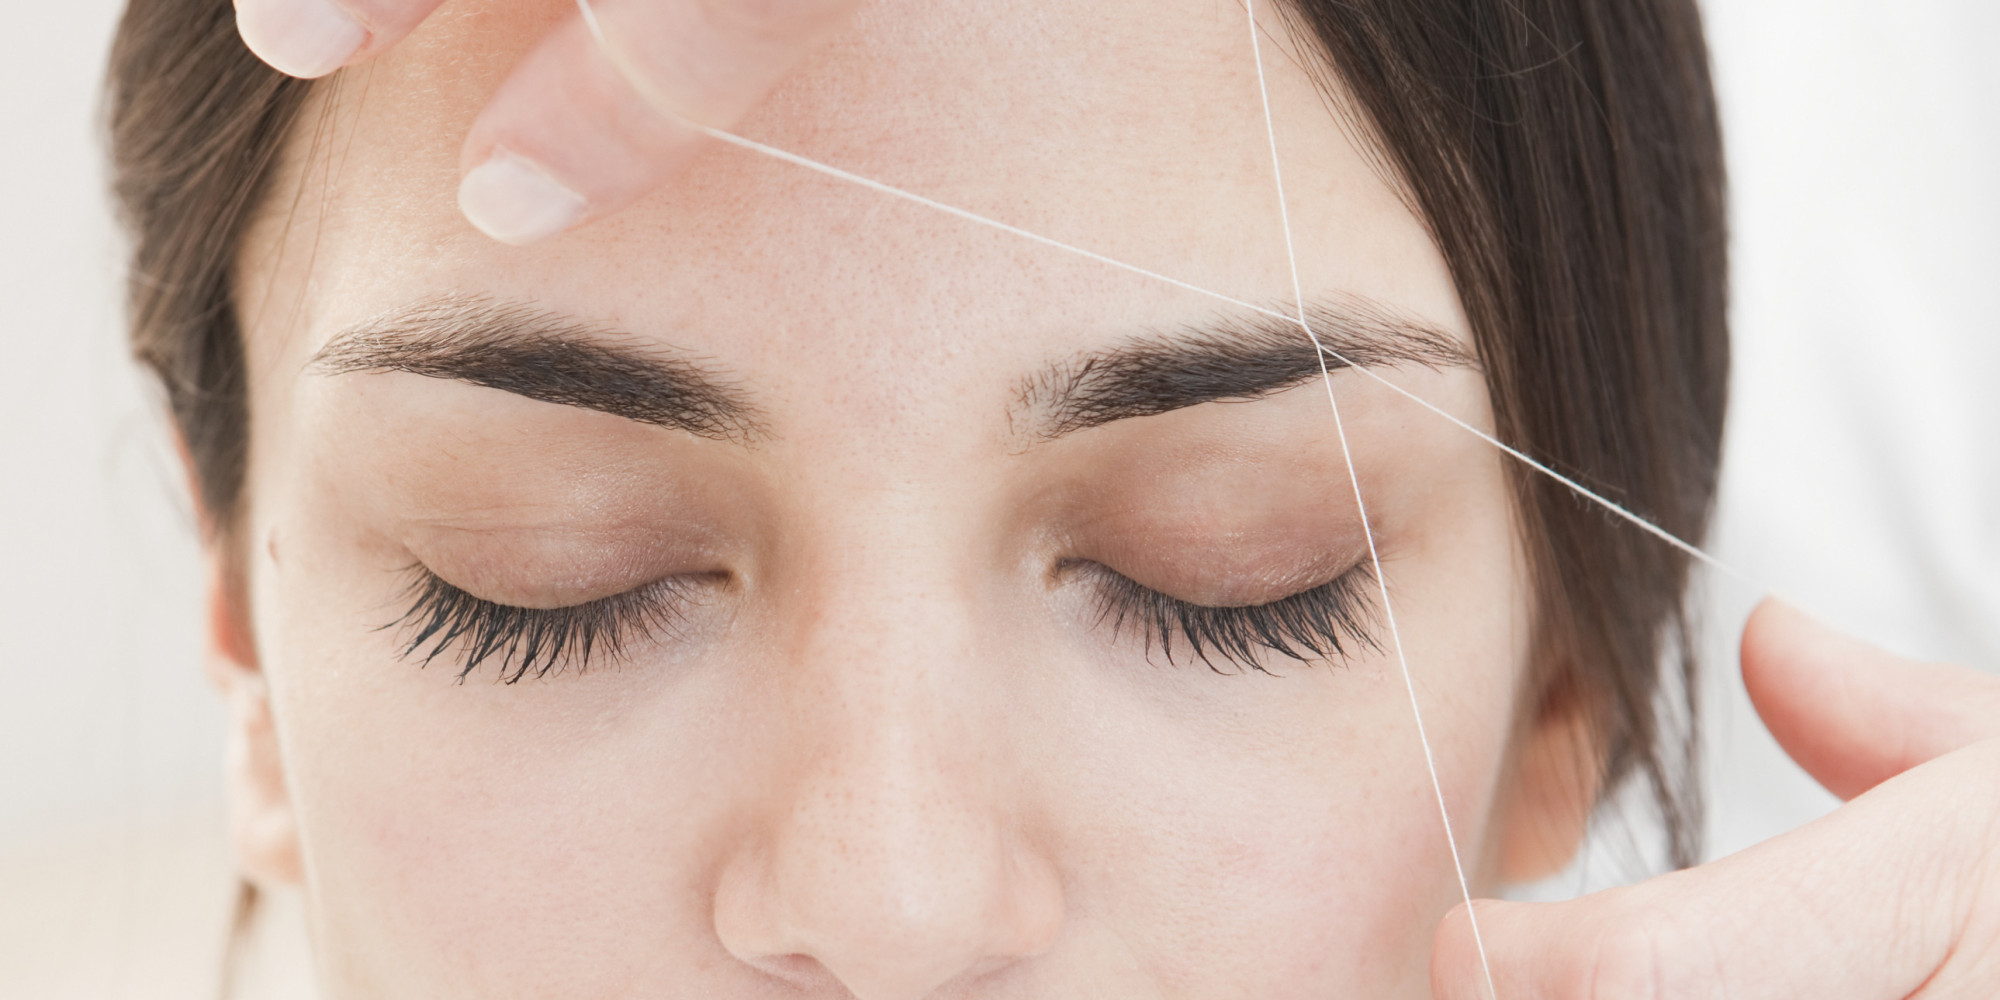 Eyebrow threading involves using a scissoring motion to tweeze hair from the brows quickly and precisely. (Source: huffingtonpost.ca)